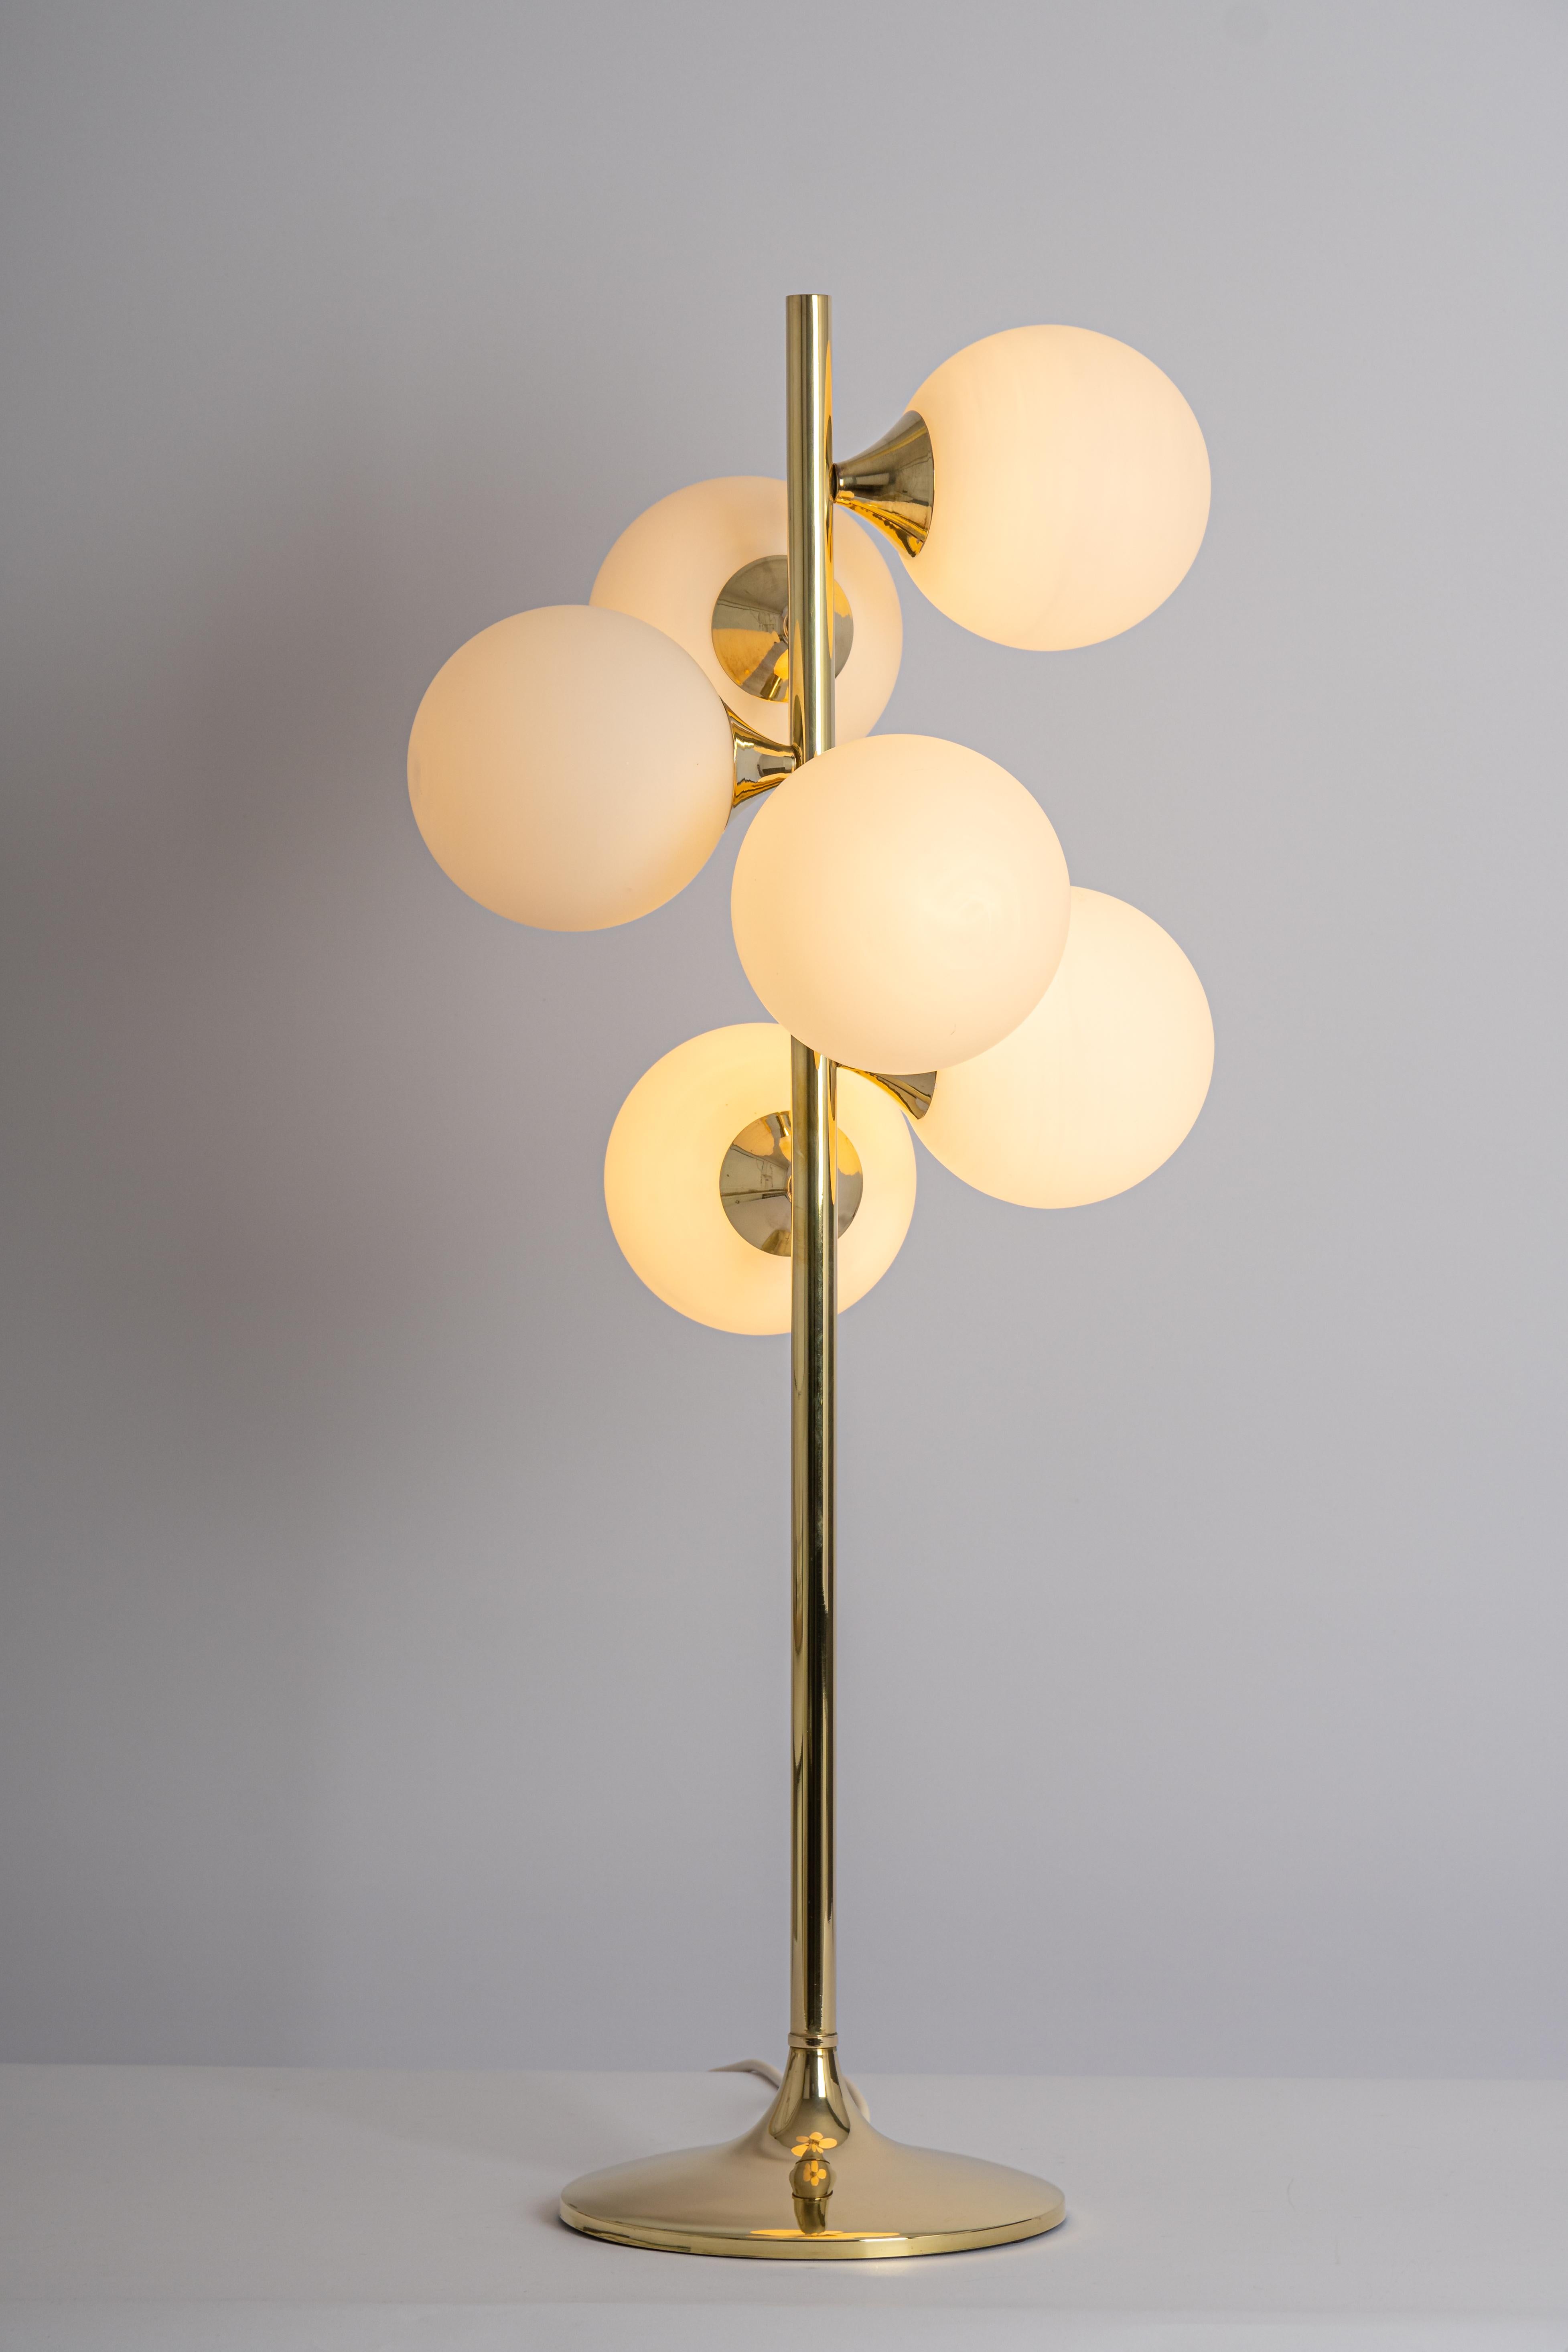 Stunning Large Brass Table / Floor Lamp by Kaiser, Germany, 1970s For Sale 2